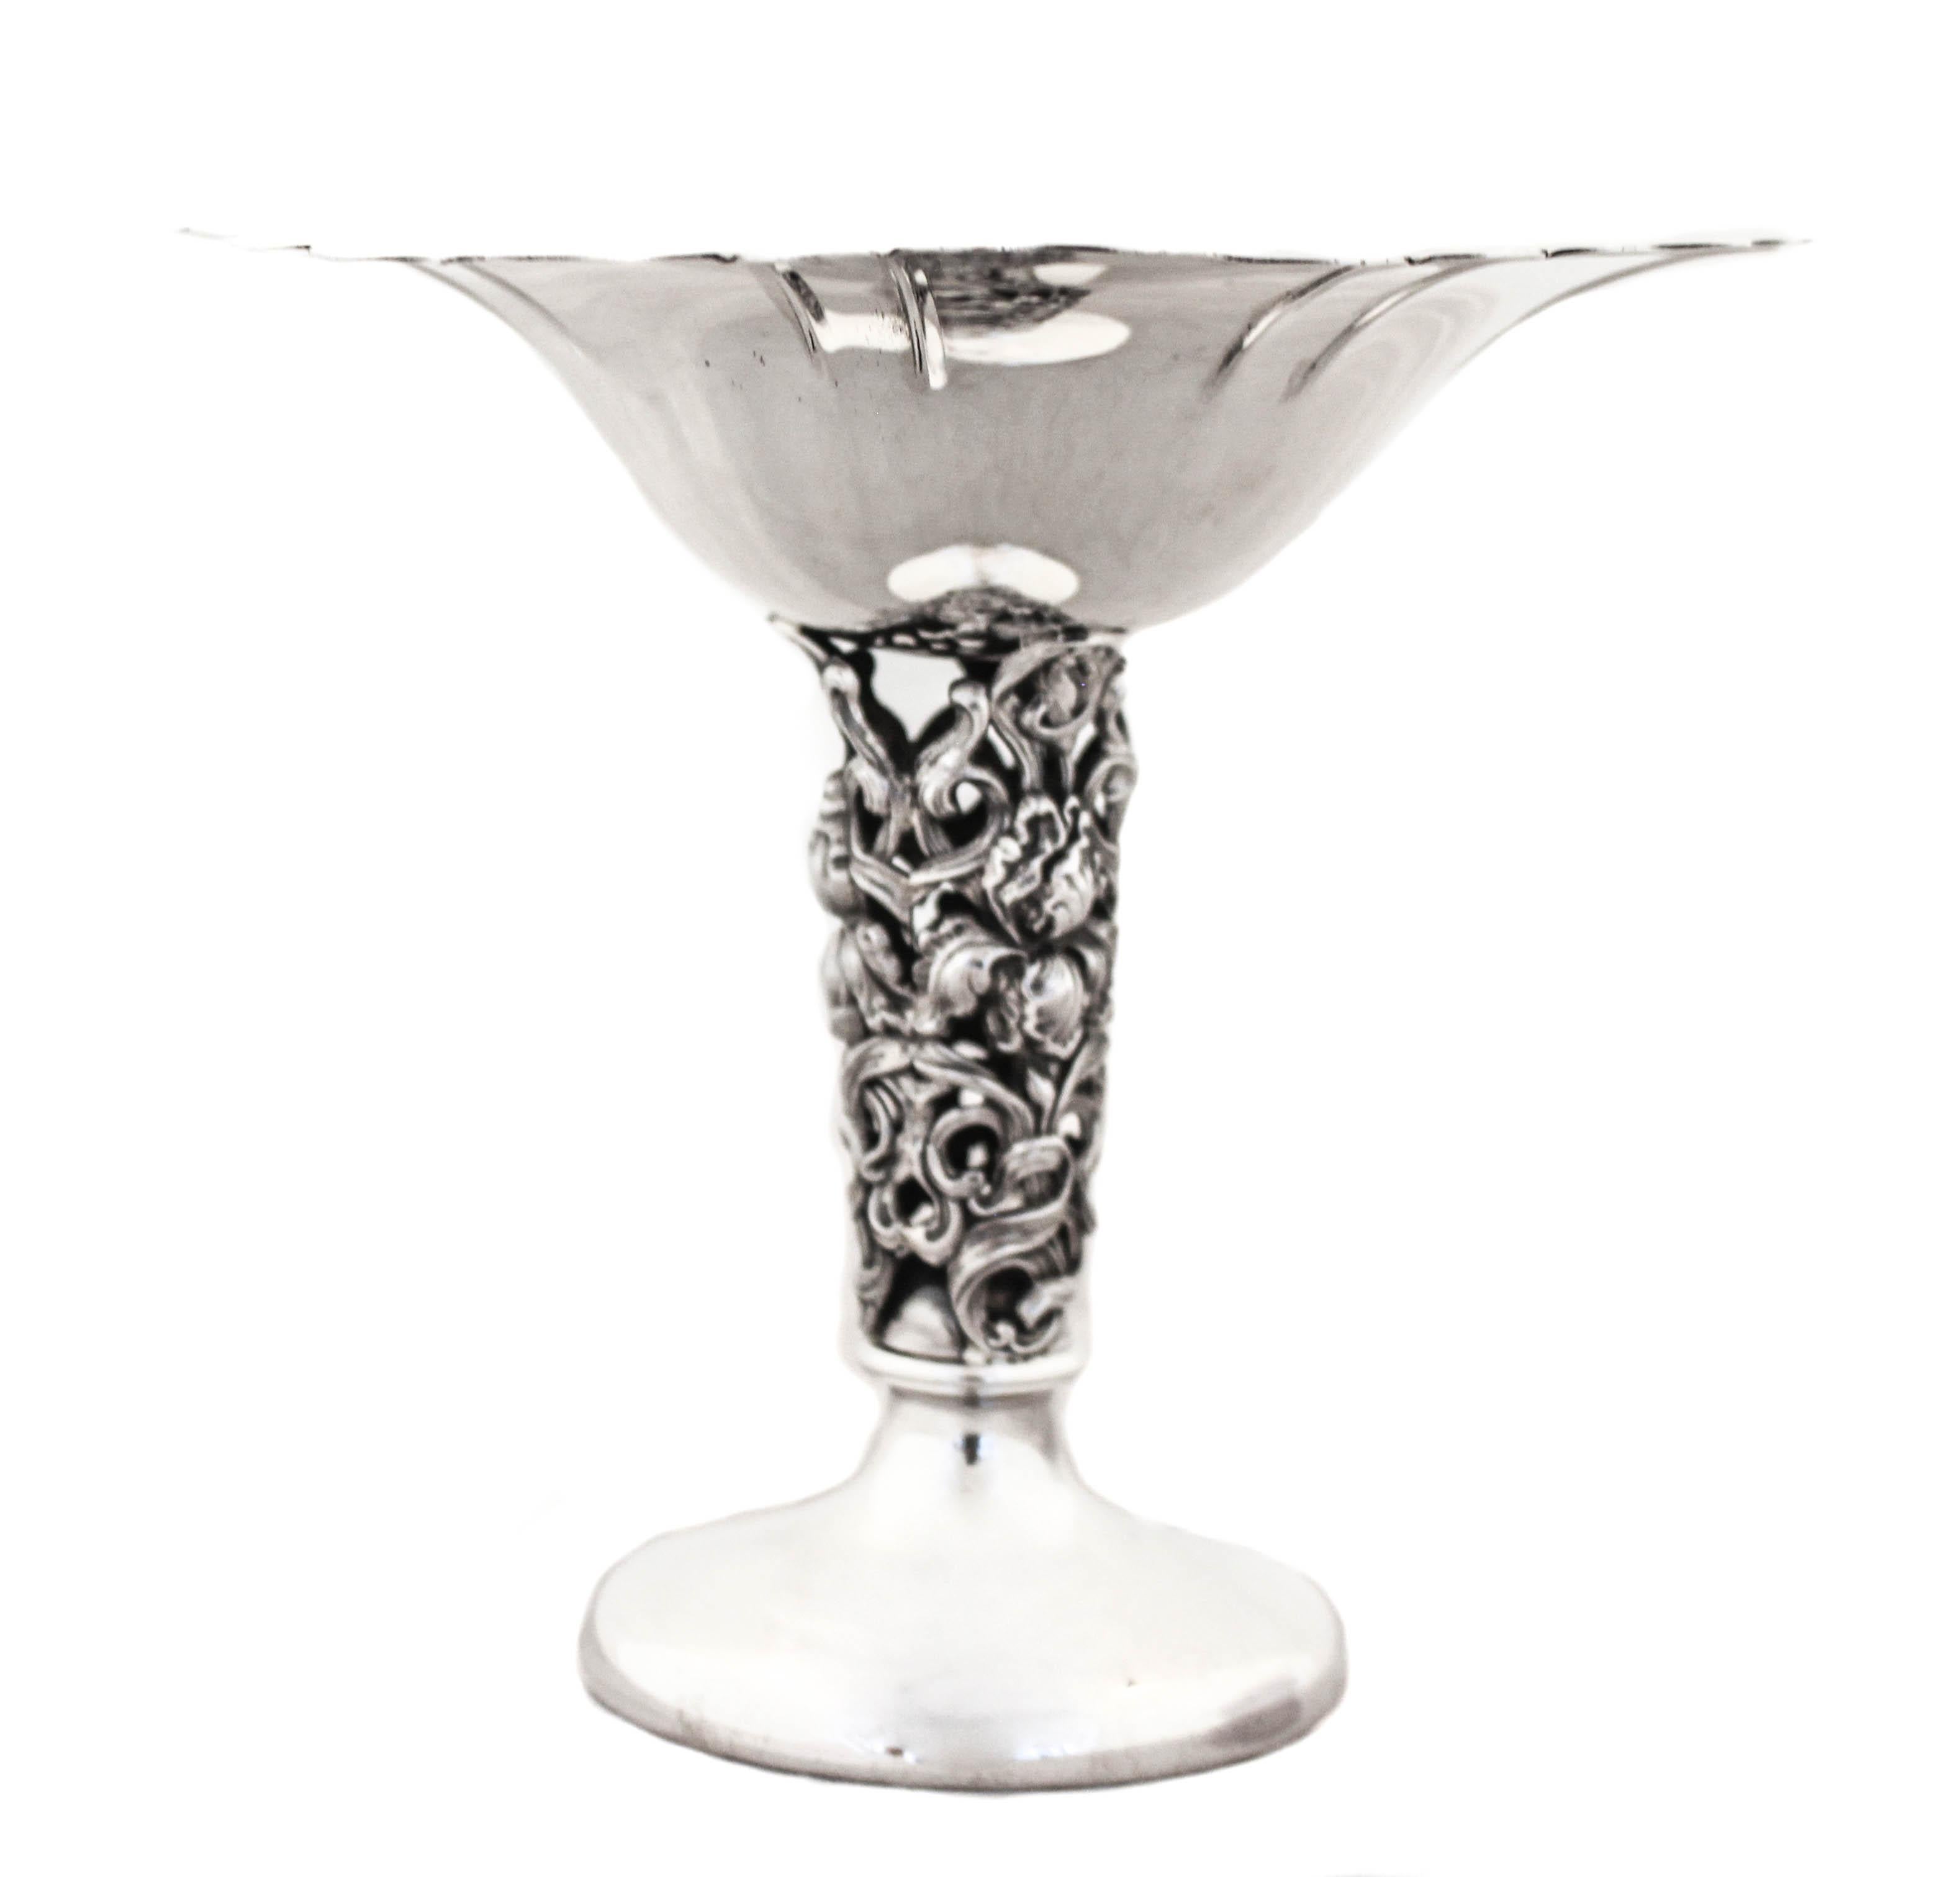 We are delighted to offer you this pair of sterling silver compotes. An interesting mix between ornate and contemporary; this pair has the best of both. The rim is scalloped and sleek as is the base but the stem has blown-out flowers with open work